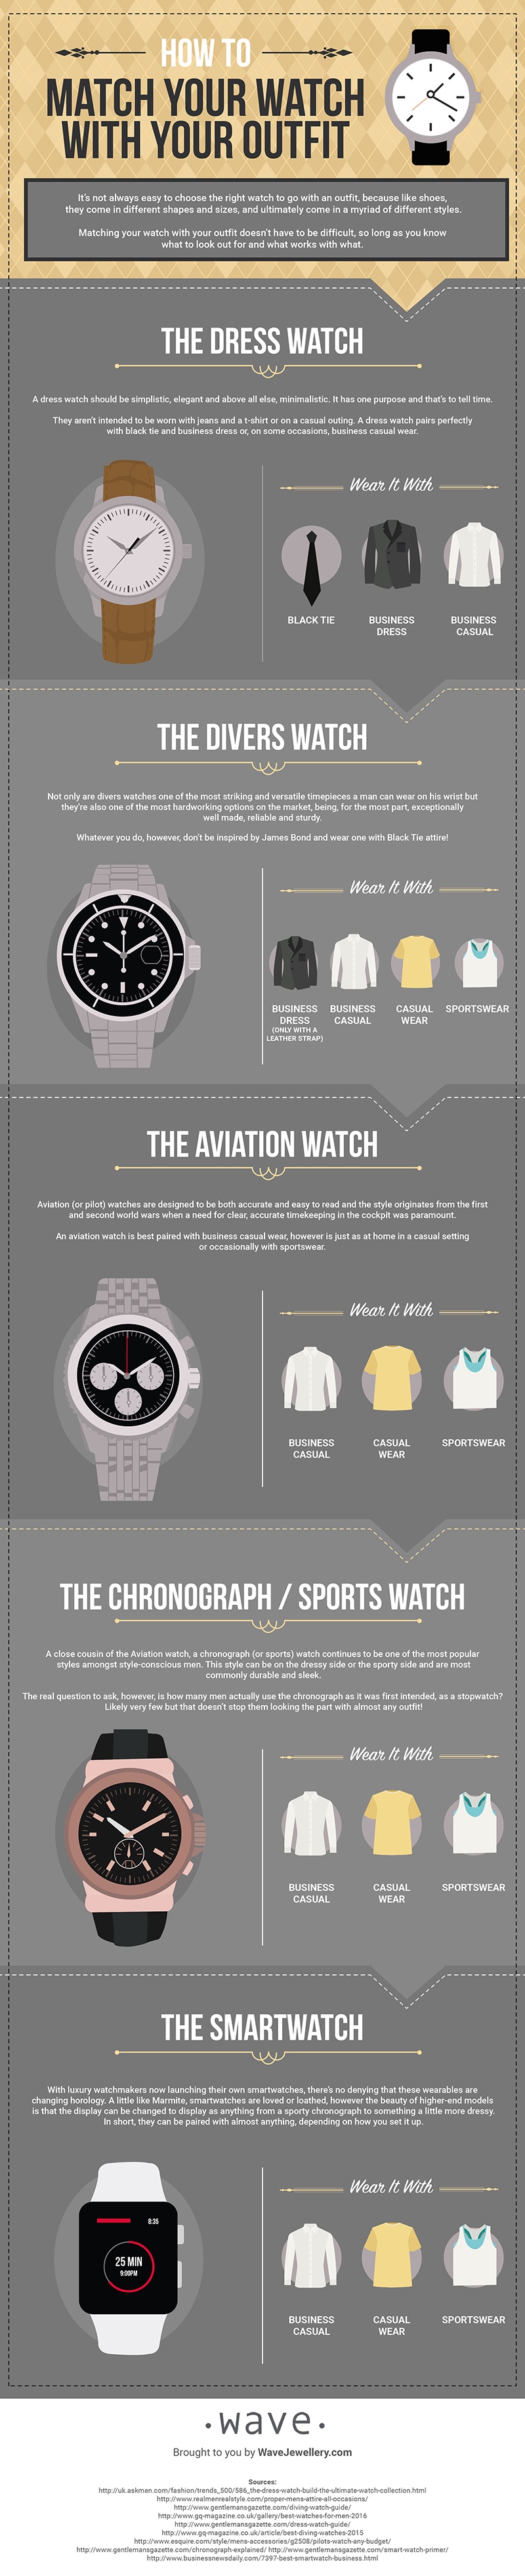 How to Match Your Watch to Your Outfit [Infographic]